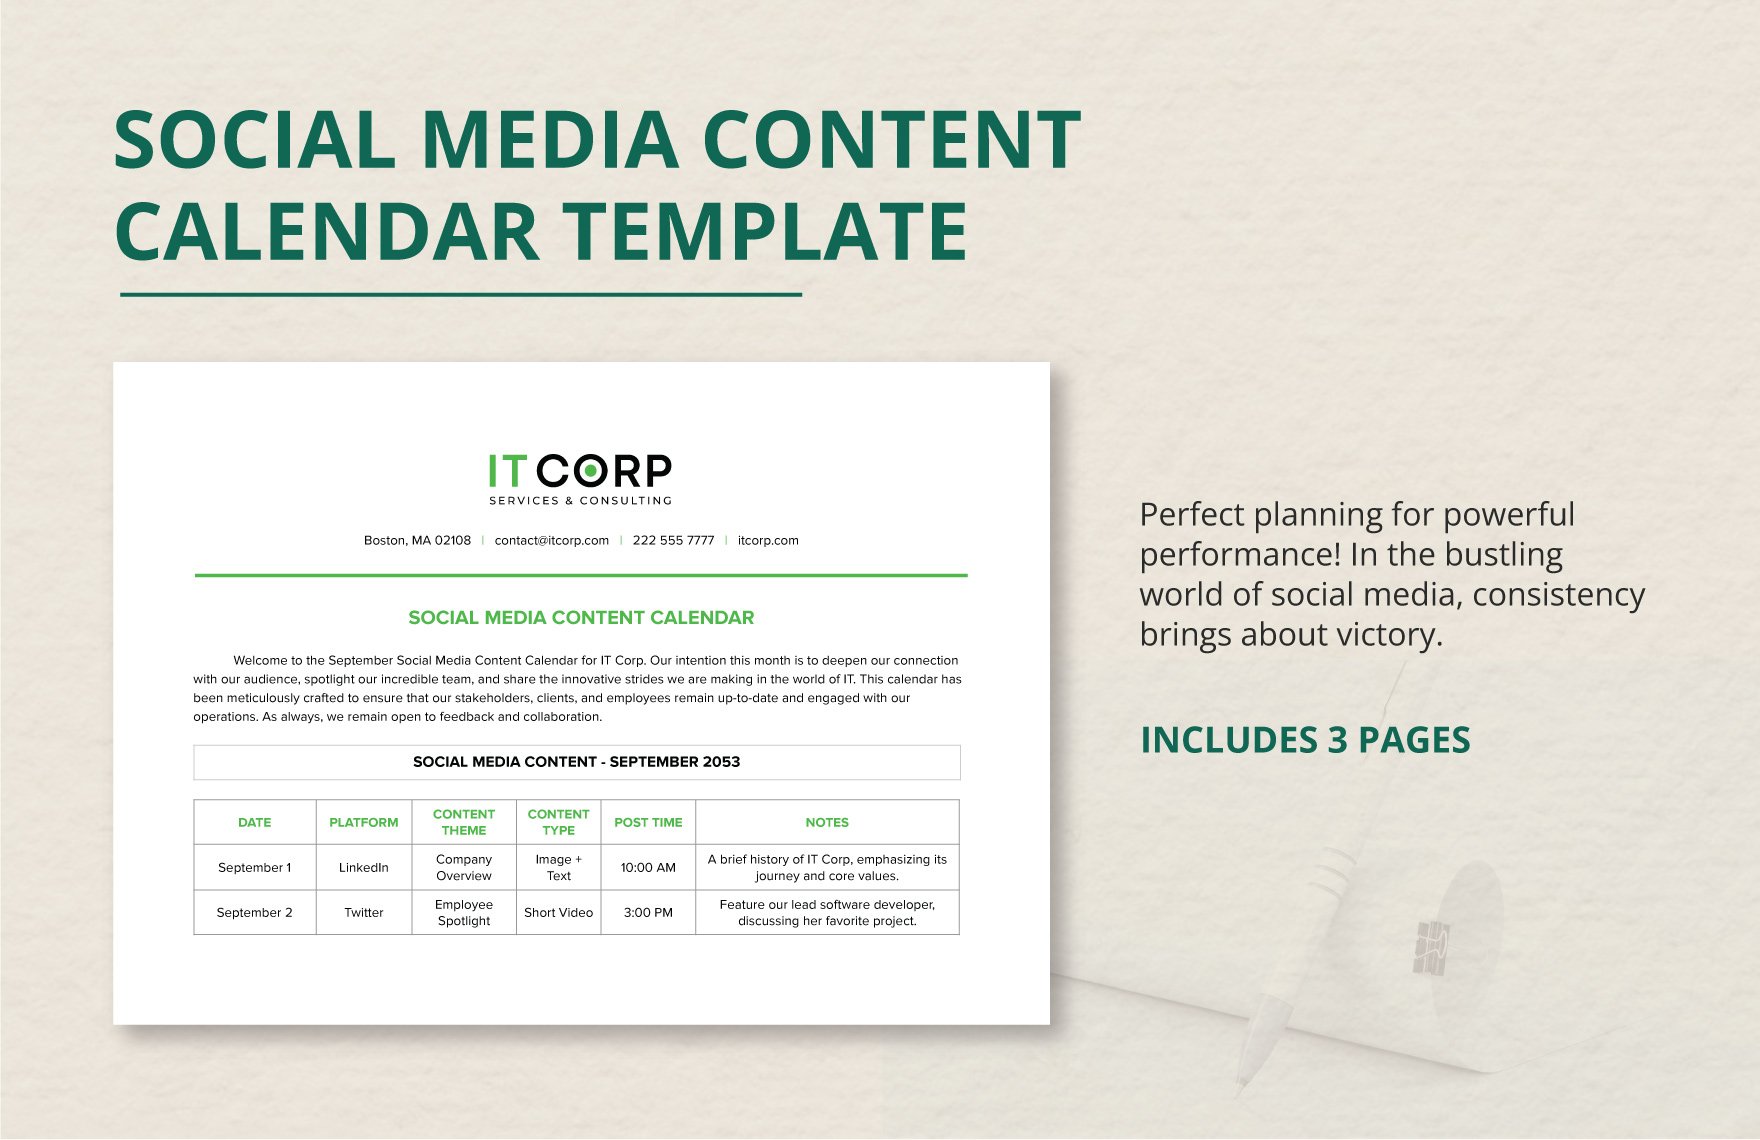 Social Media Calendar Template in Pages GDocsLink MS Word Portable